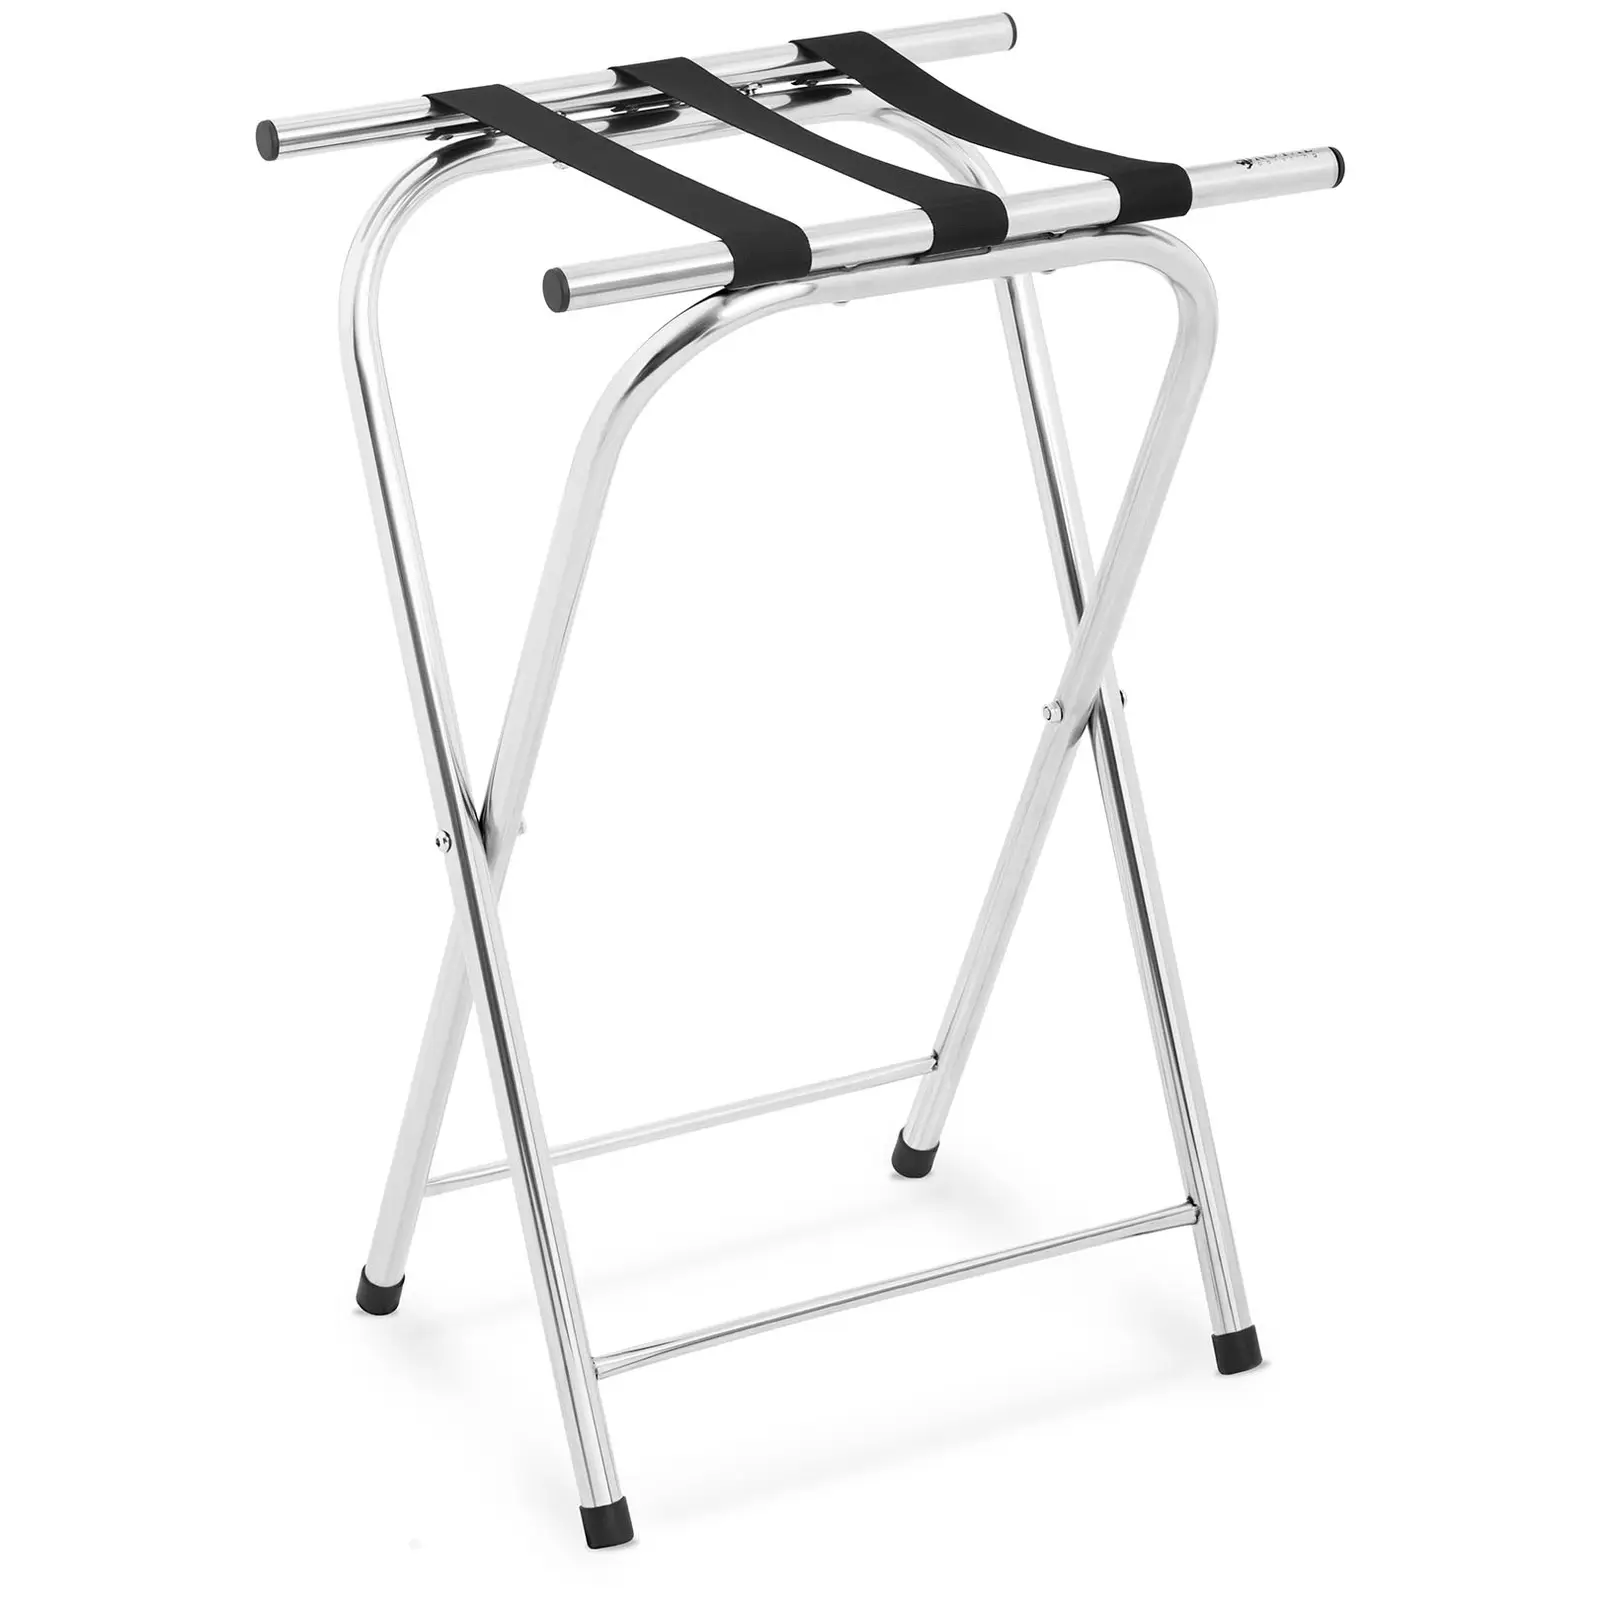 Suitcase Stand - folding - up to 25 kg